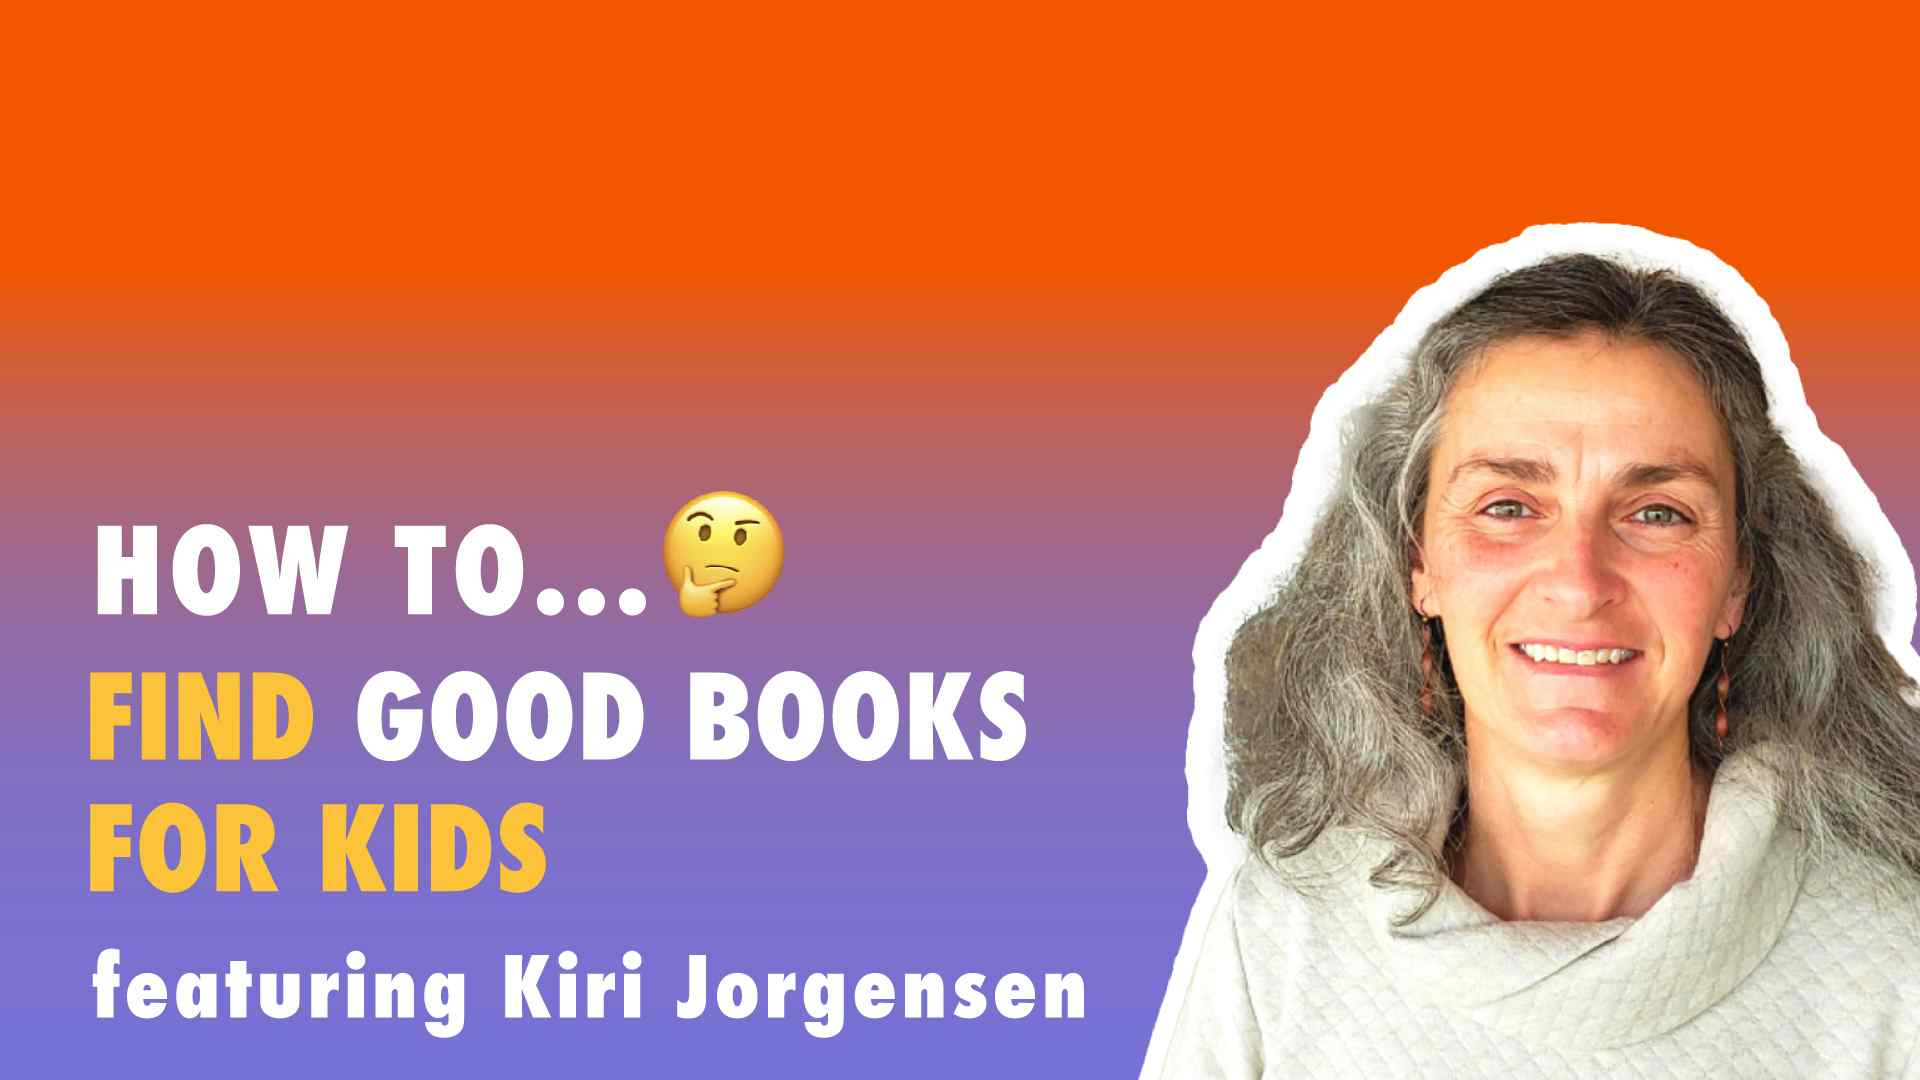 How To Find Good Books for Kids with Kiri Jorgenson